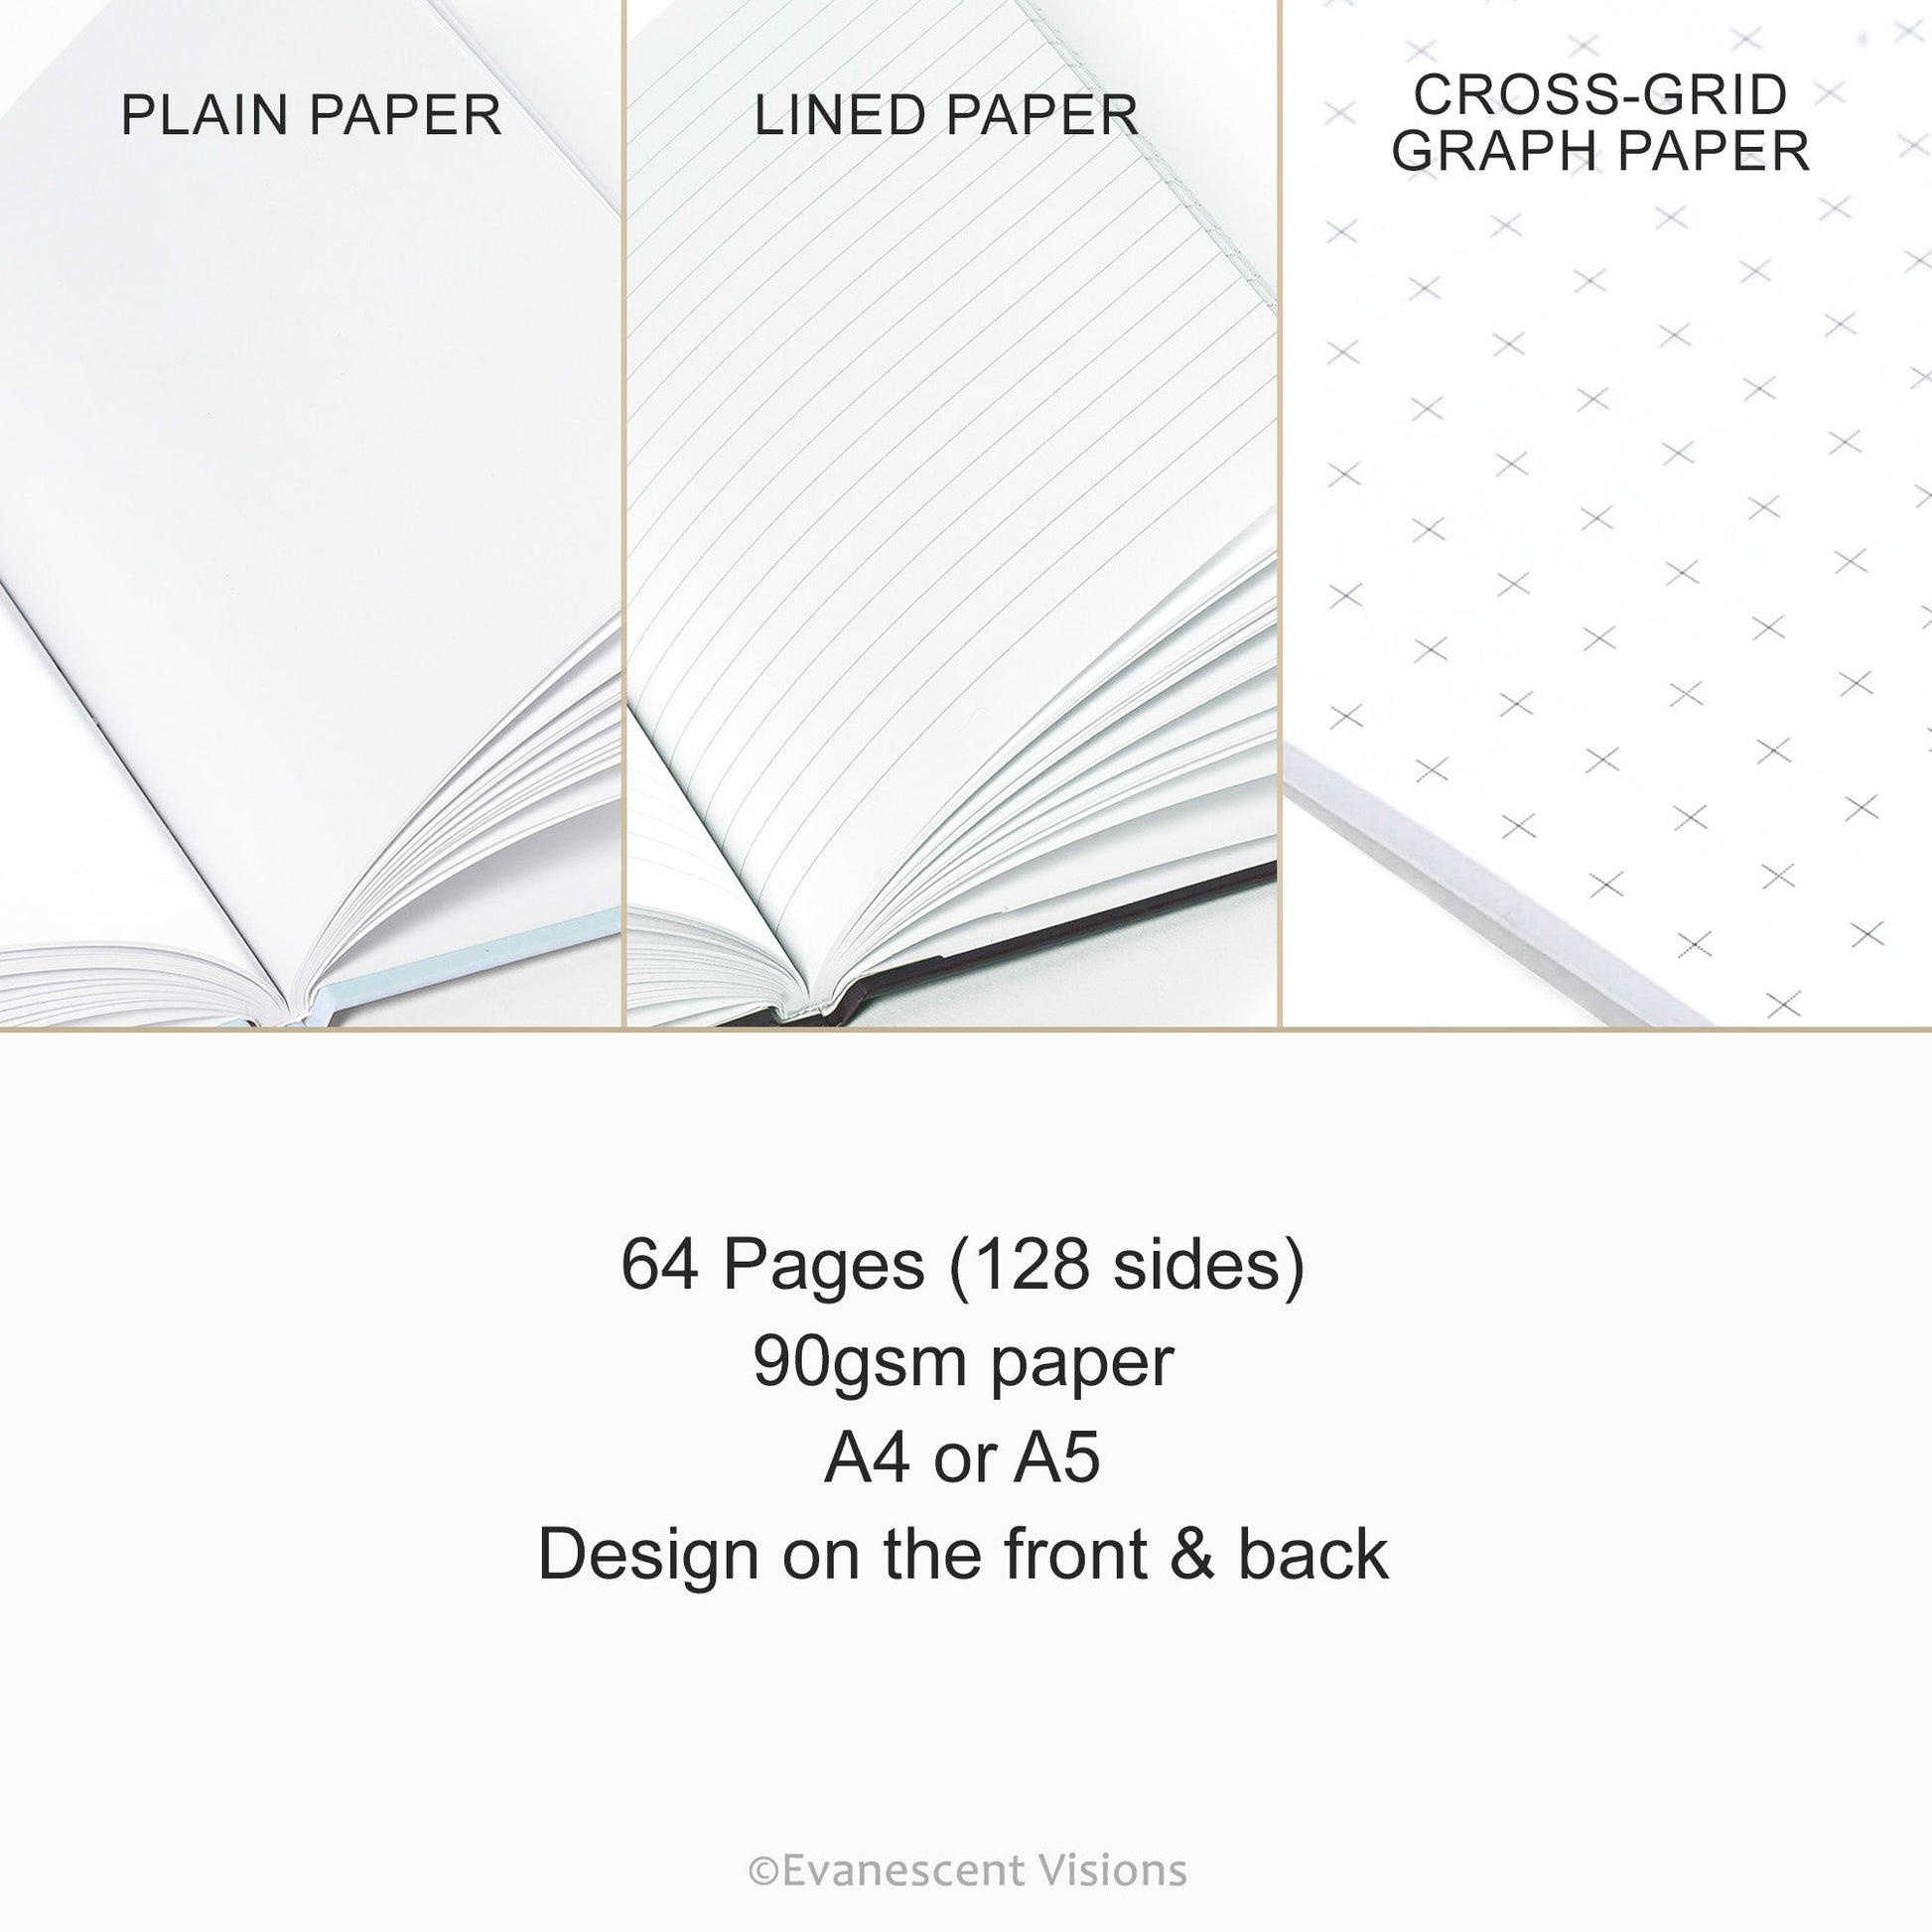 Paper options and size details